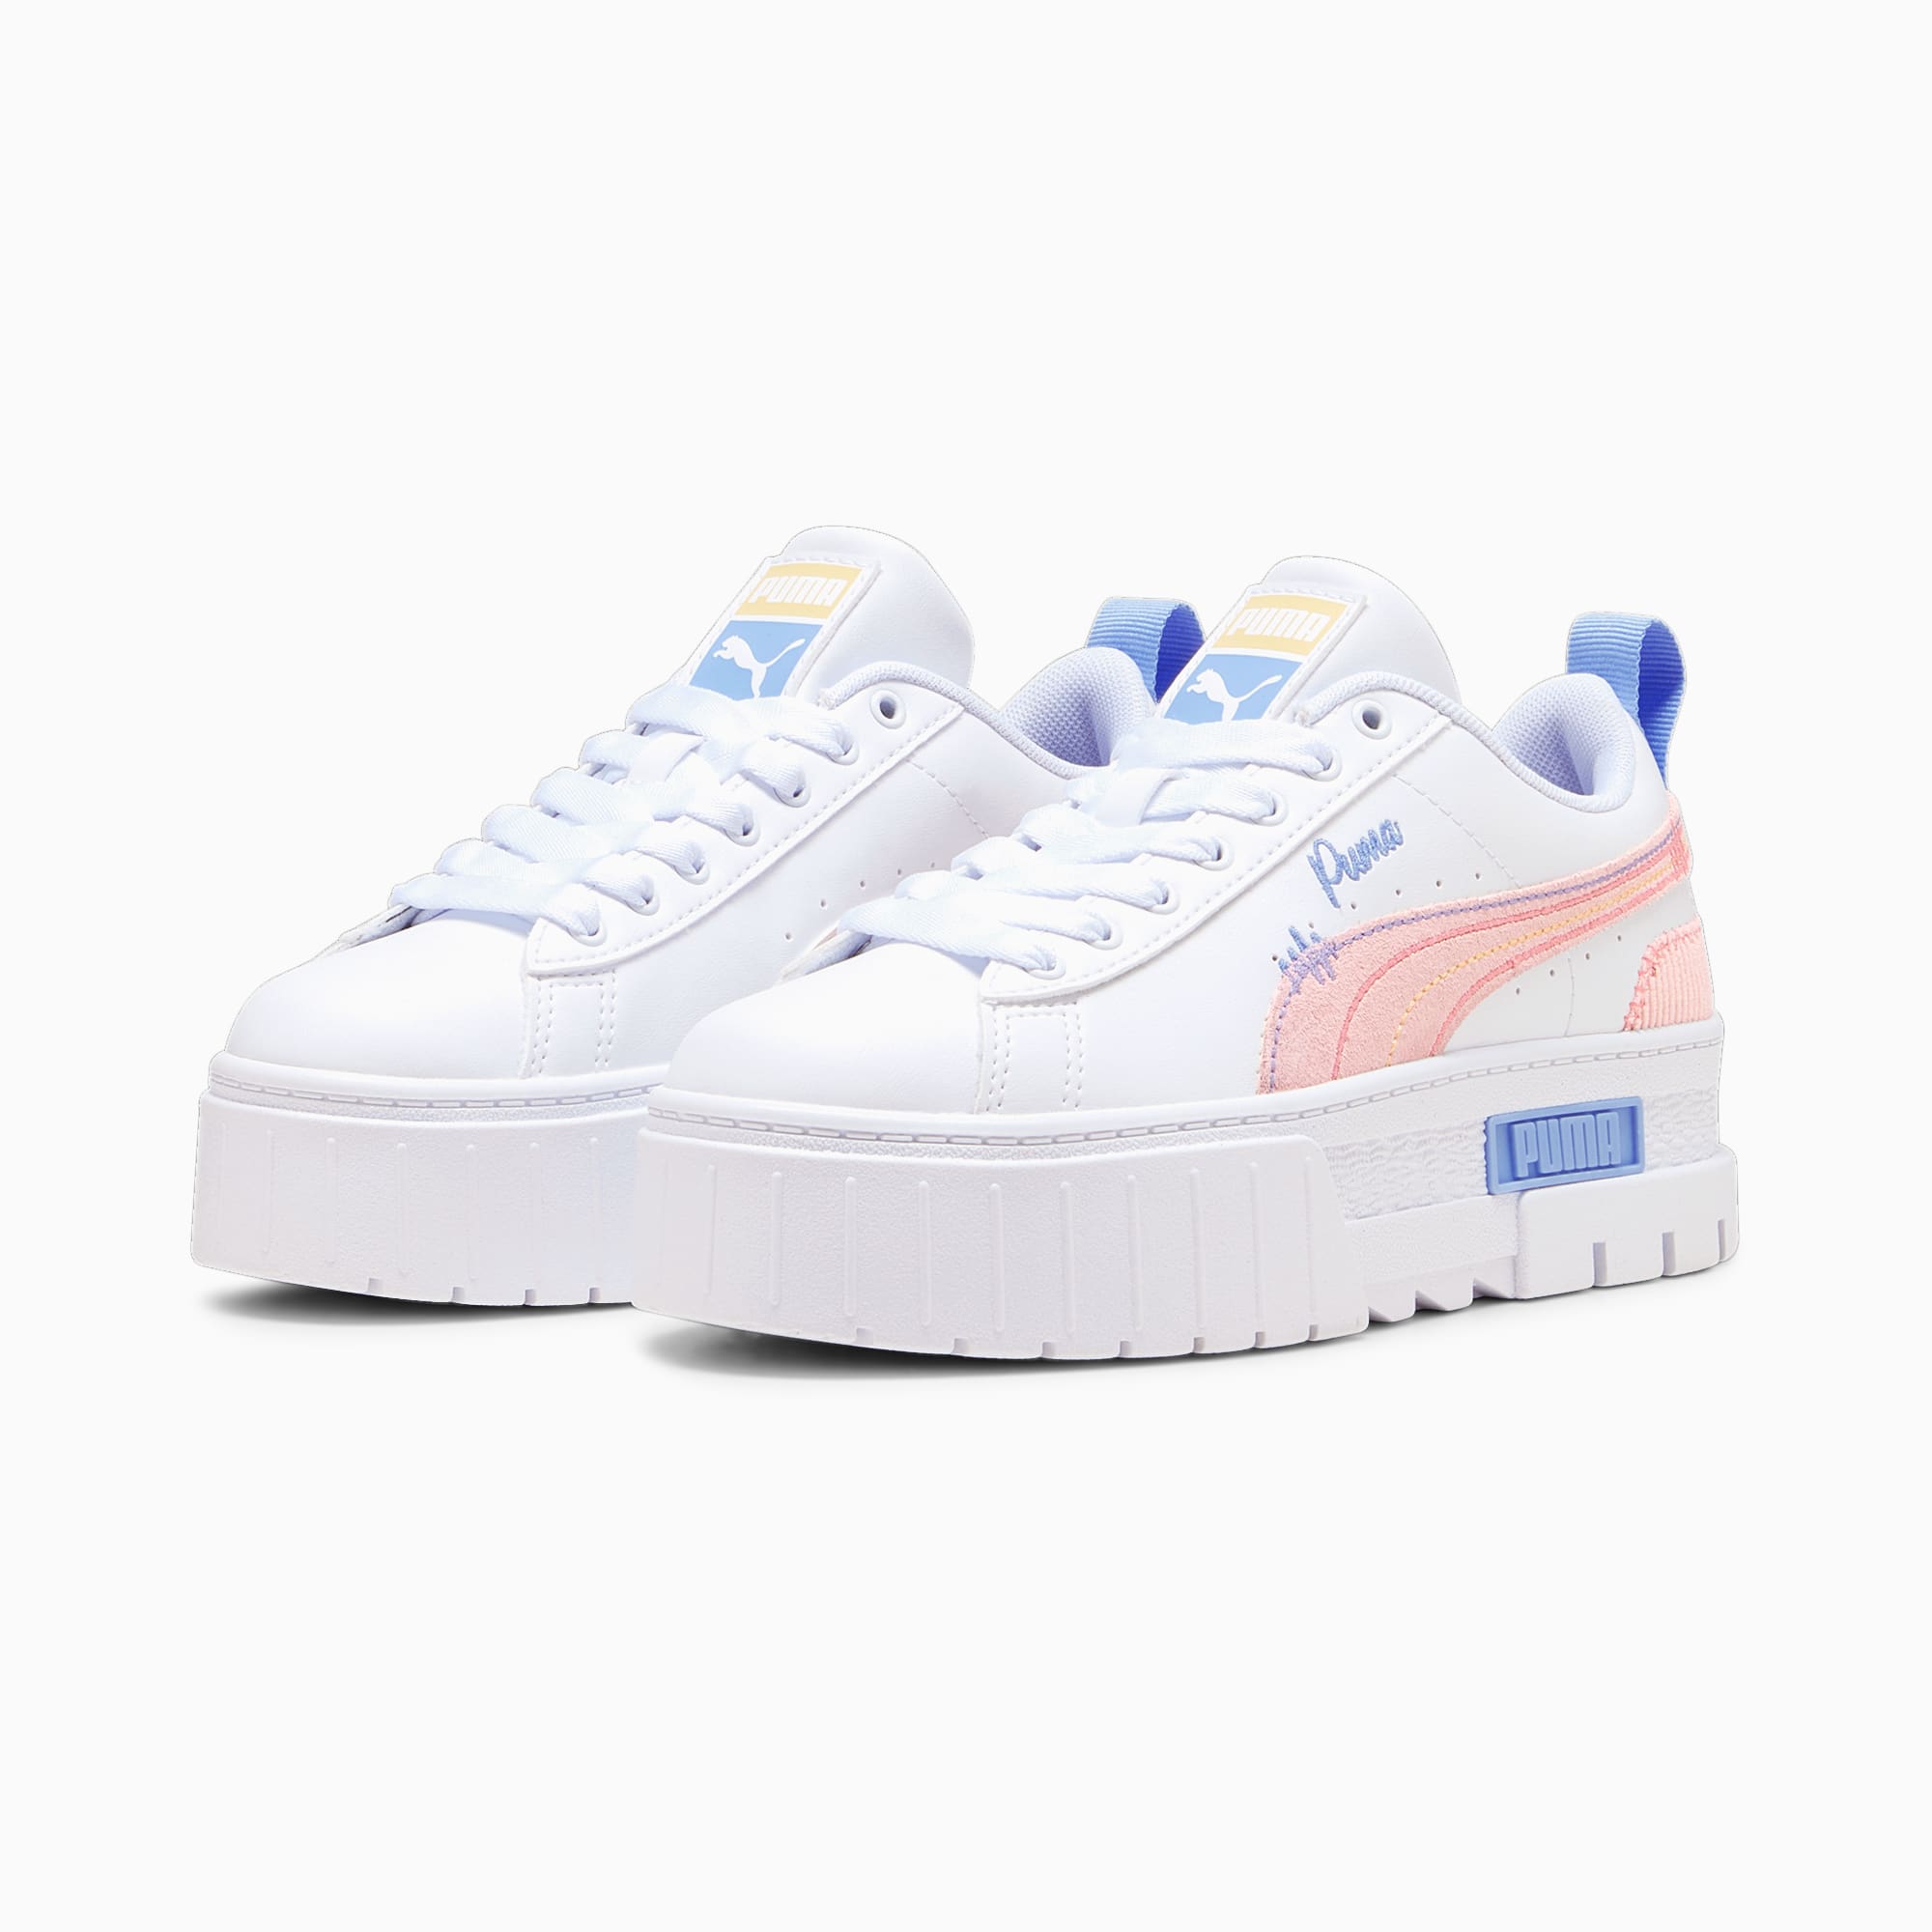 PUMA Mayze Sweater Weather Youth Sneakers, White/Blissful Blue/Peach Smoothie